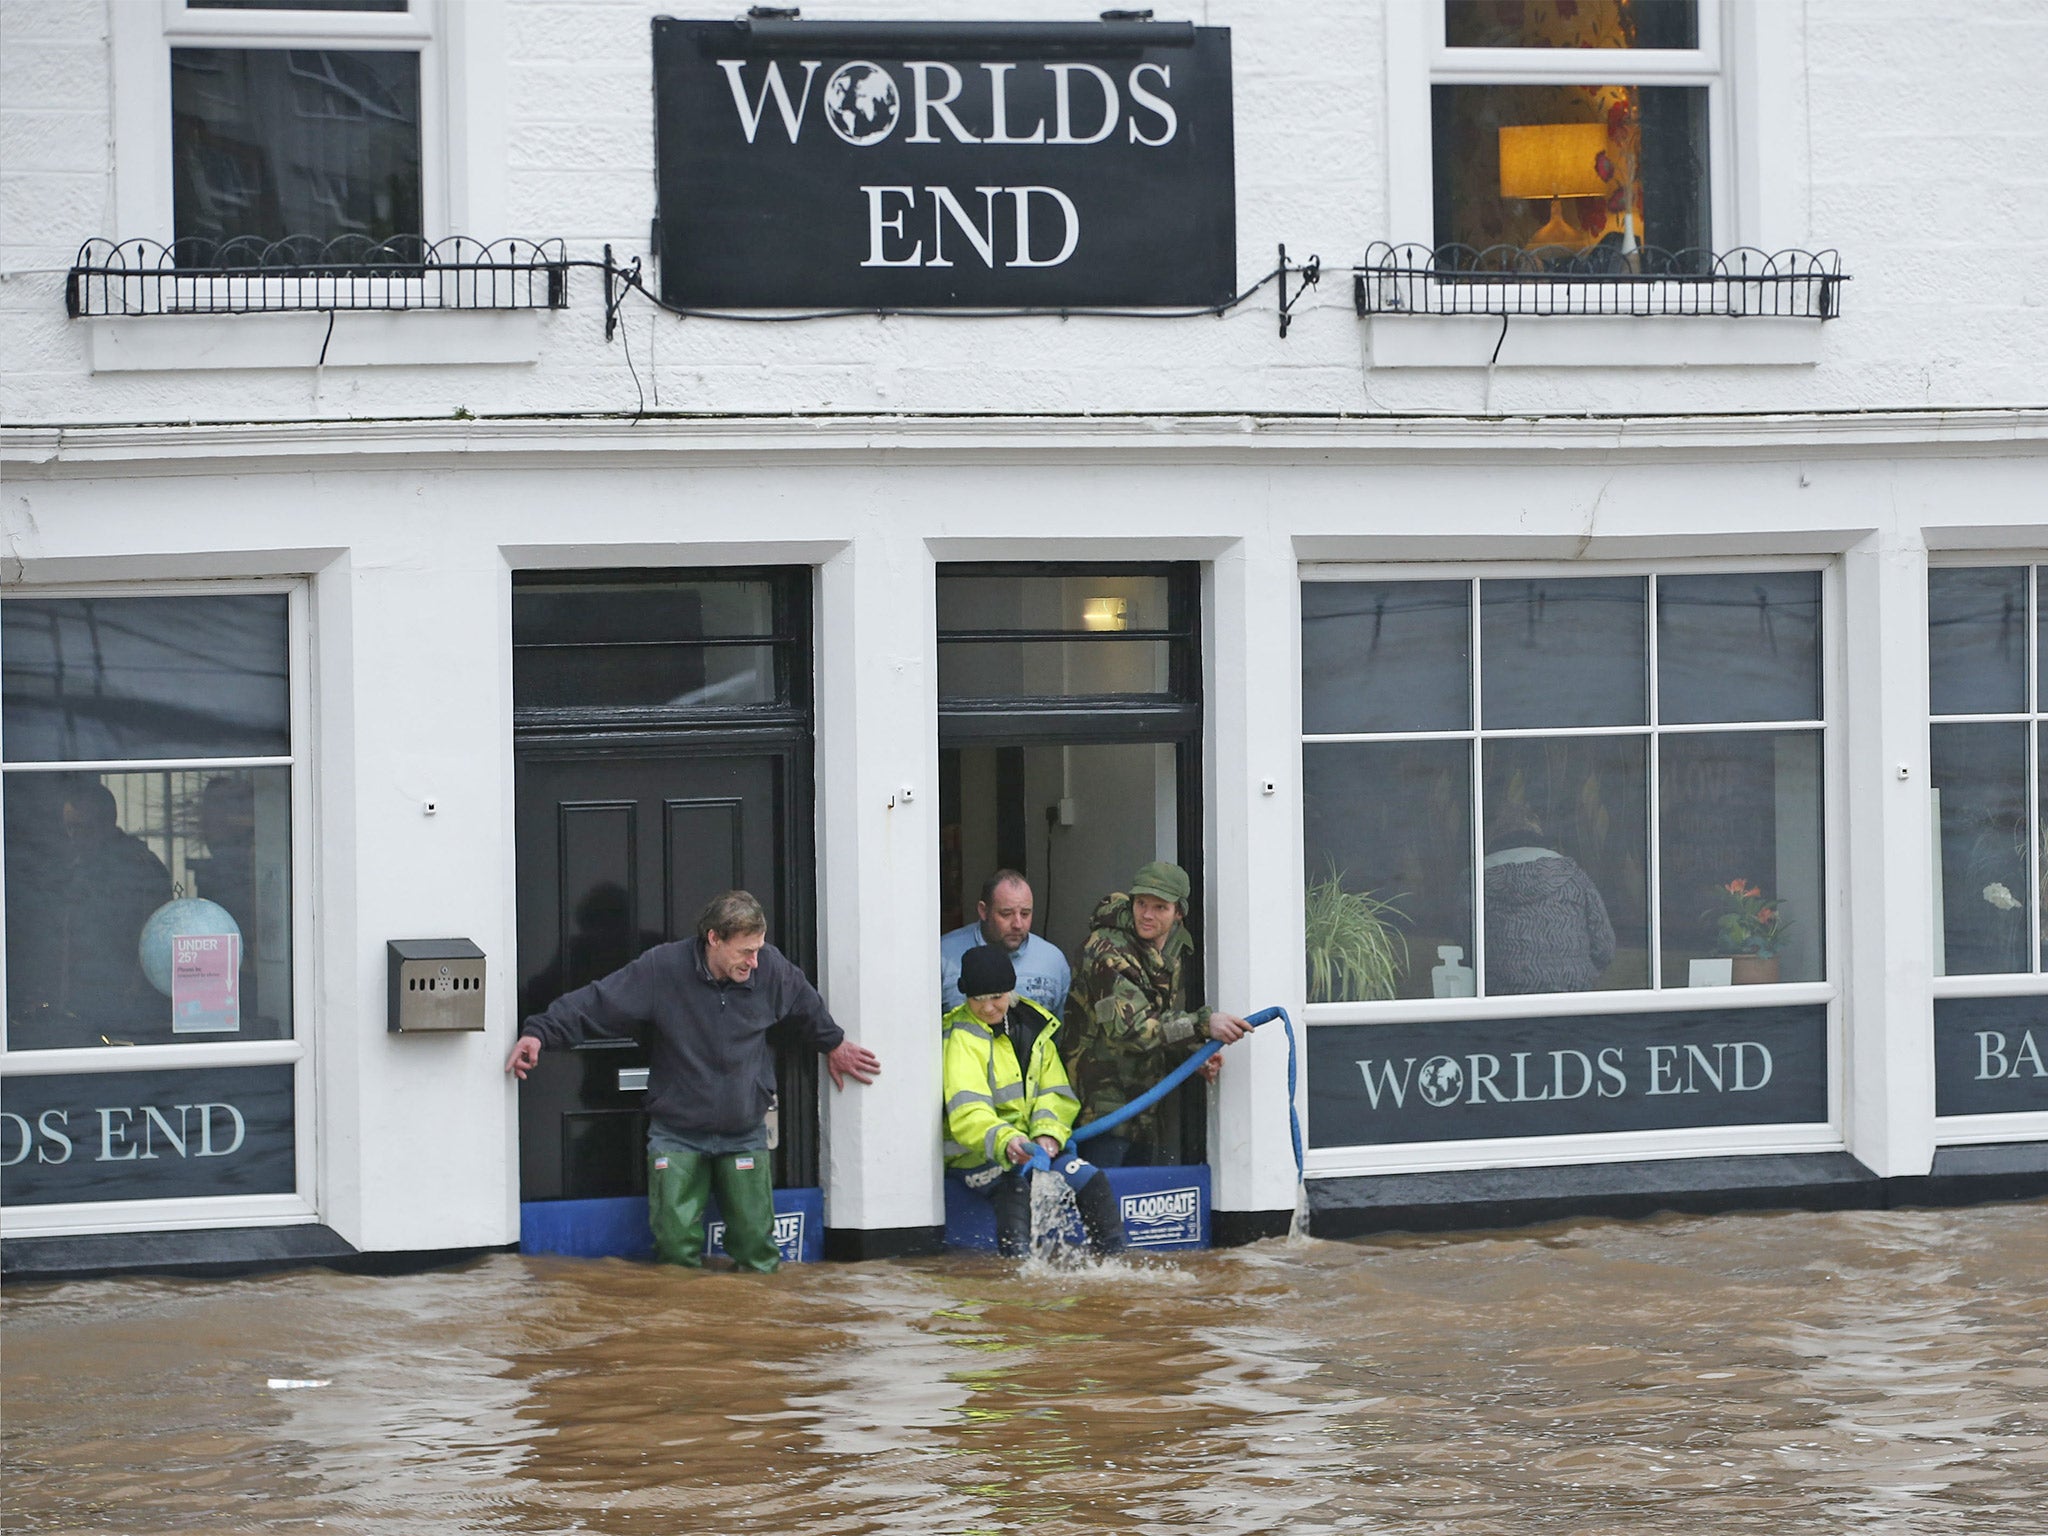 People pump water from the Worlds End pub in Dumfries, Scotland